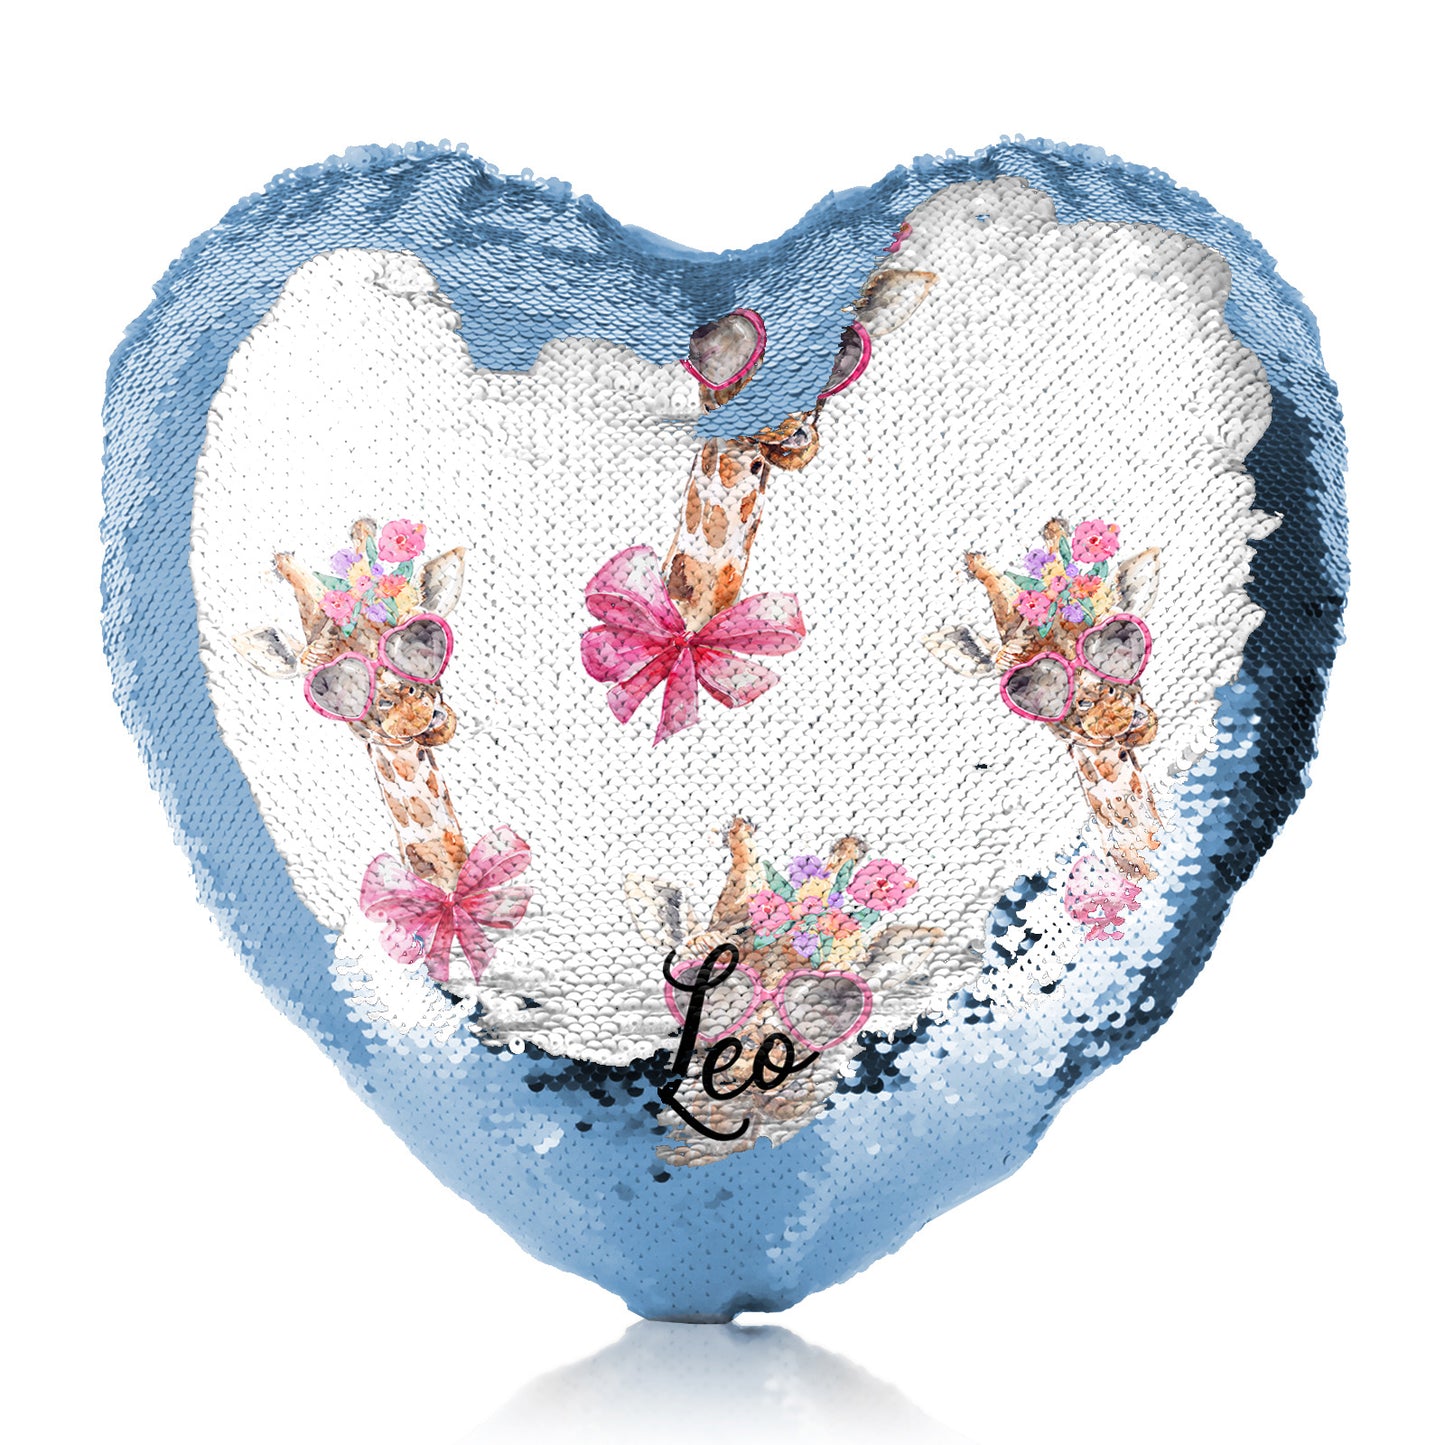 Personalised Sequin Heart Cushion with Giraffe Pink Bow Multicolour Flowers and Cute Text